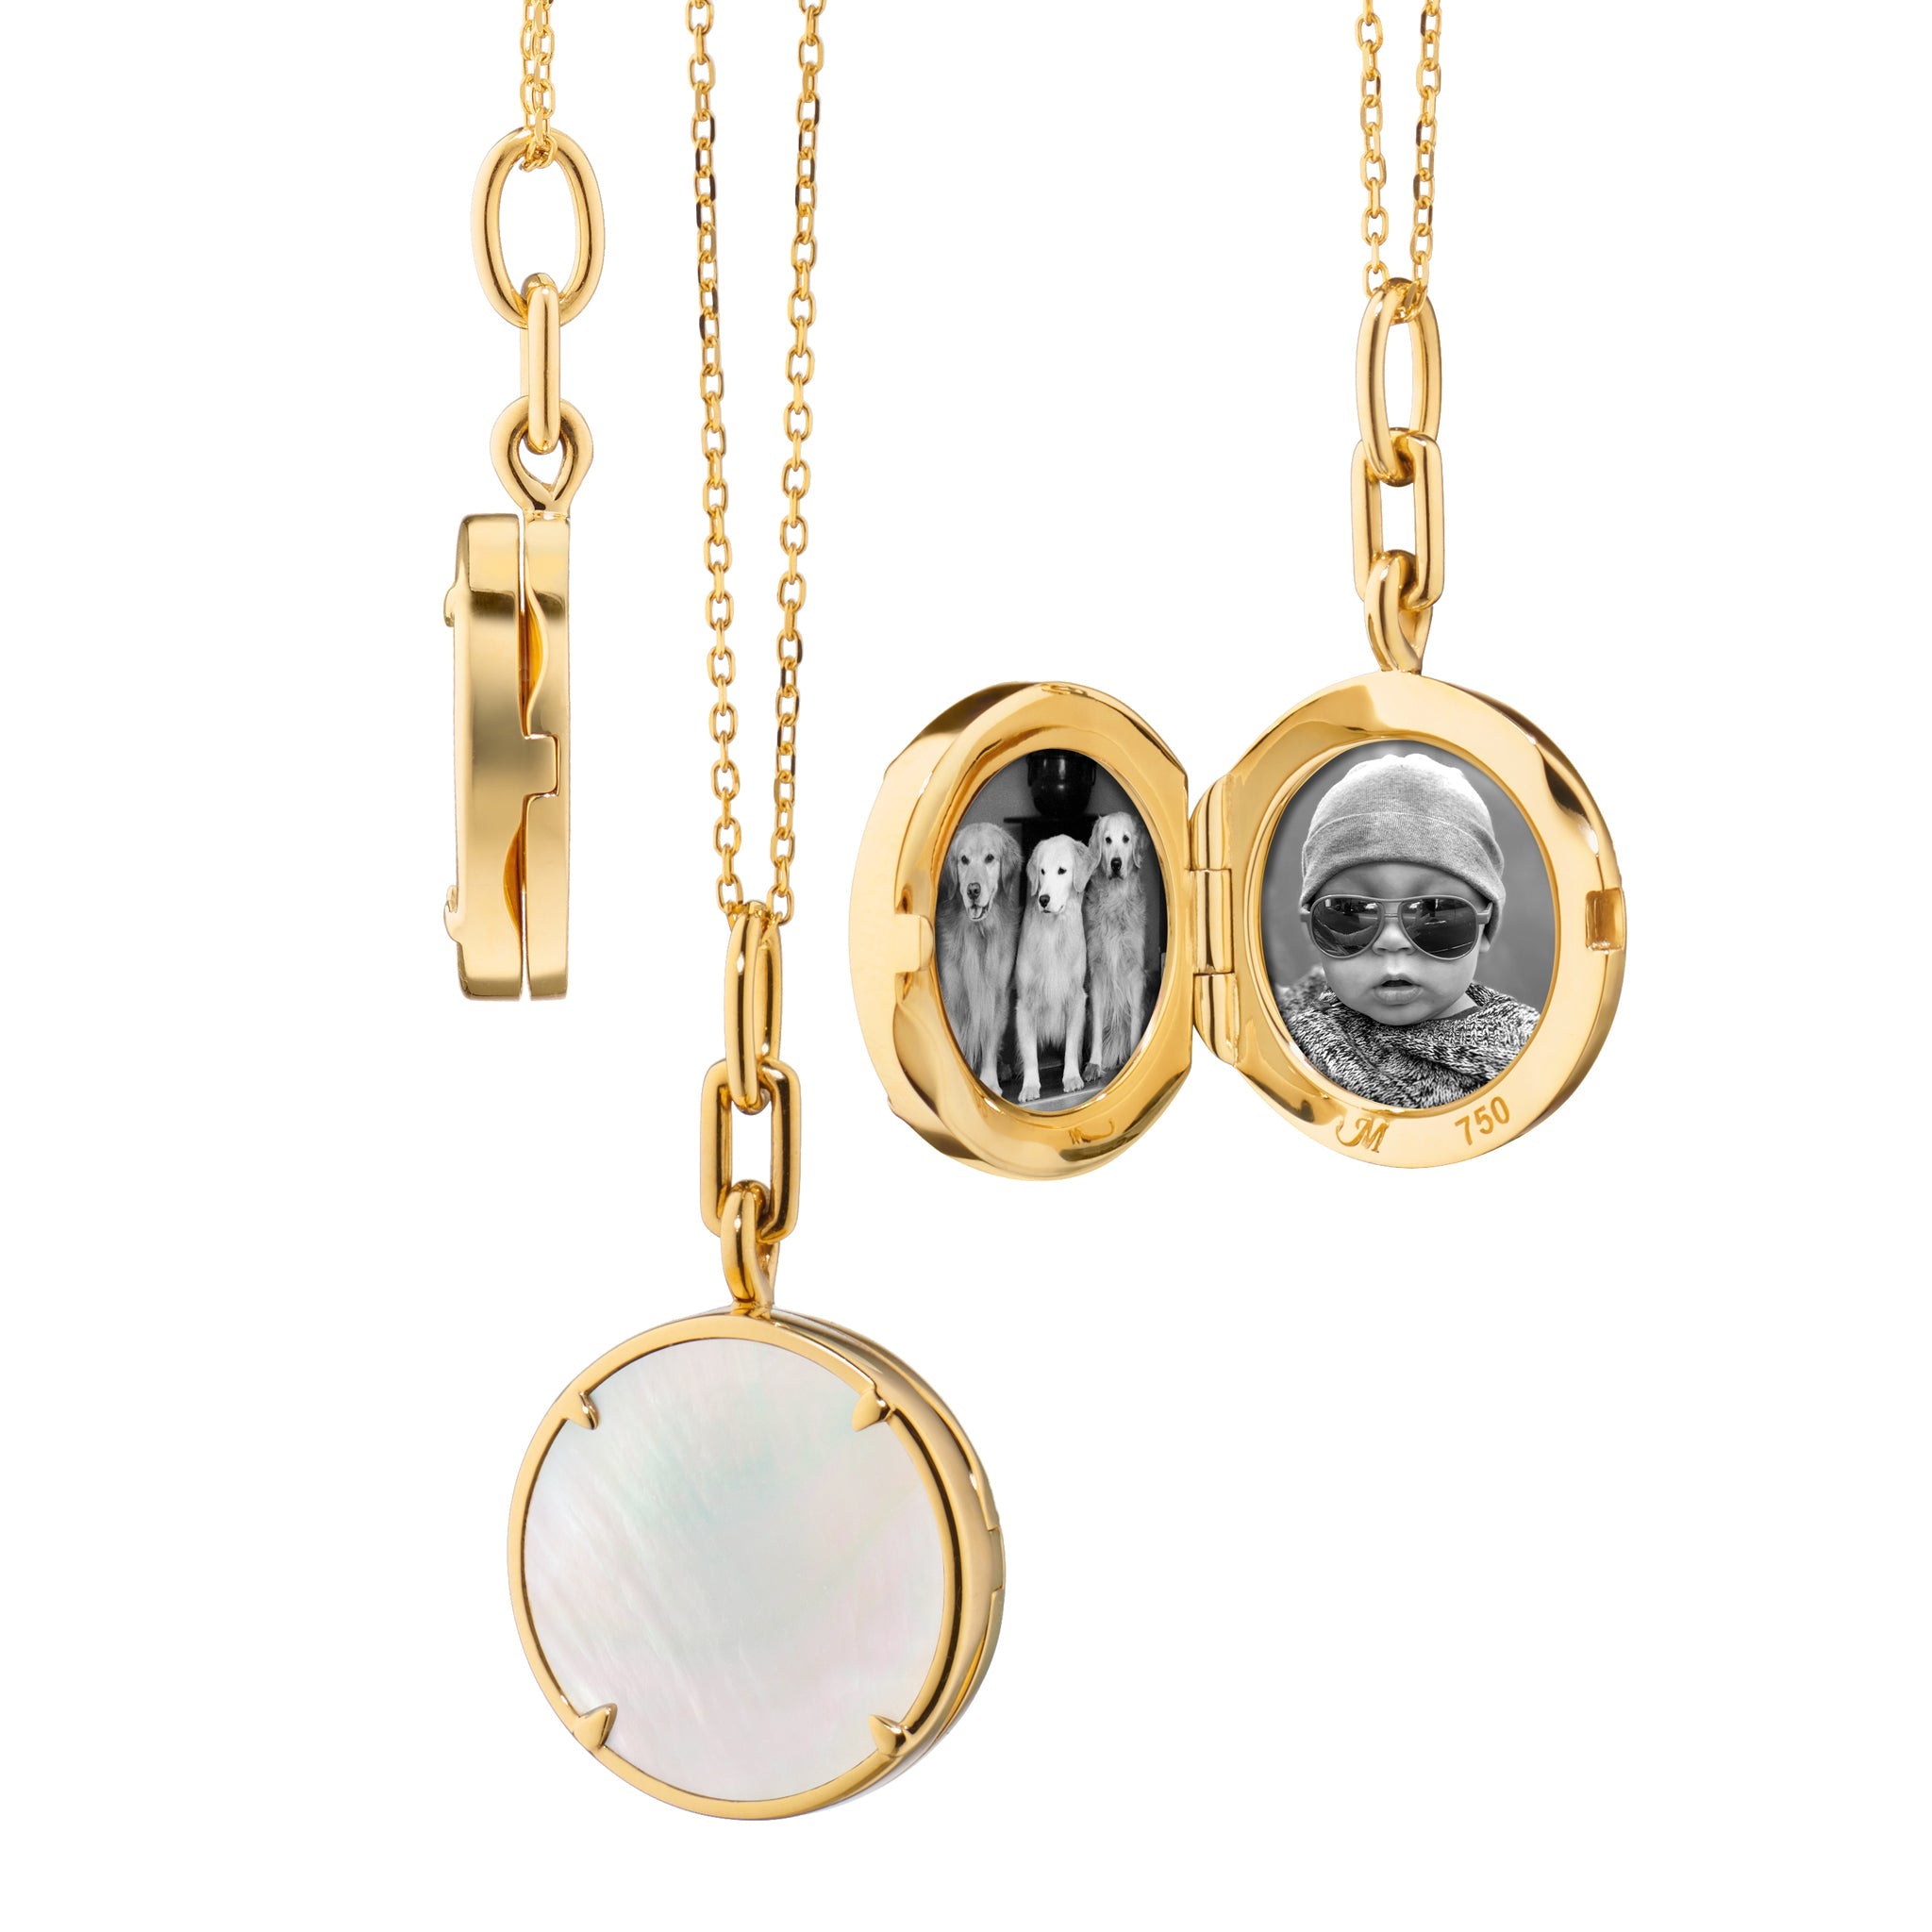 Brooke Stone Slim Locket with Mother of Pearl